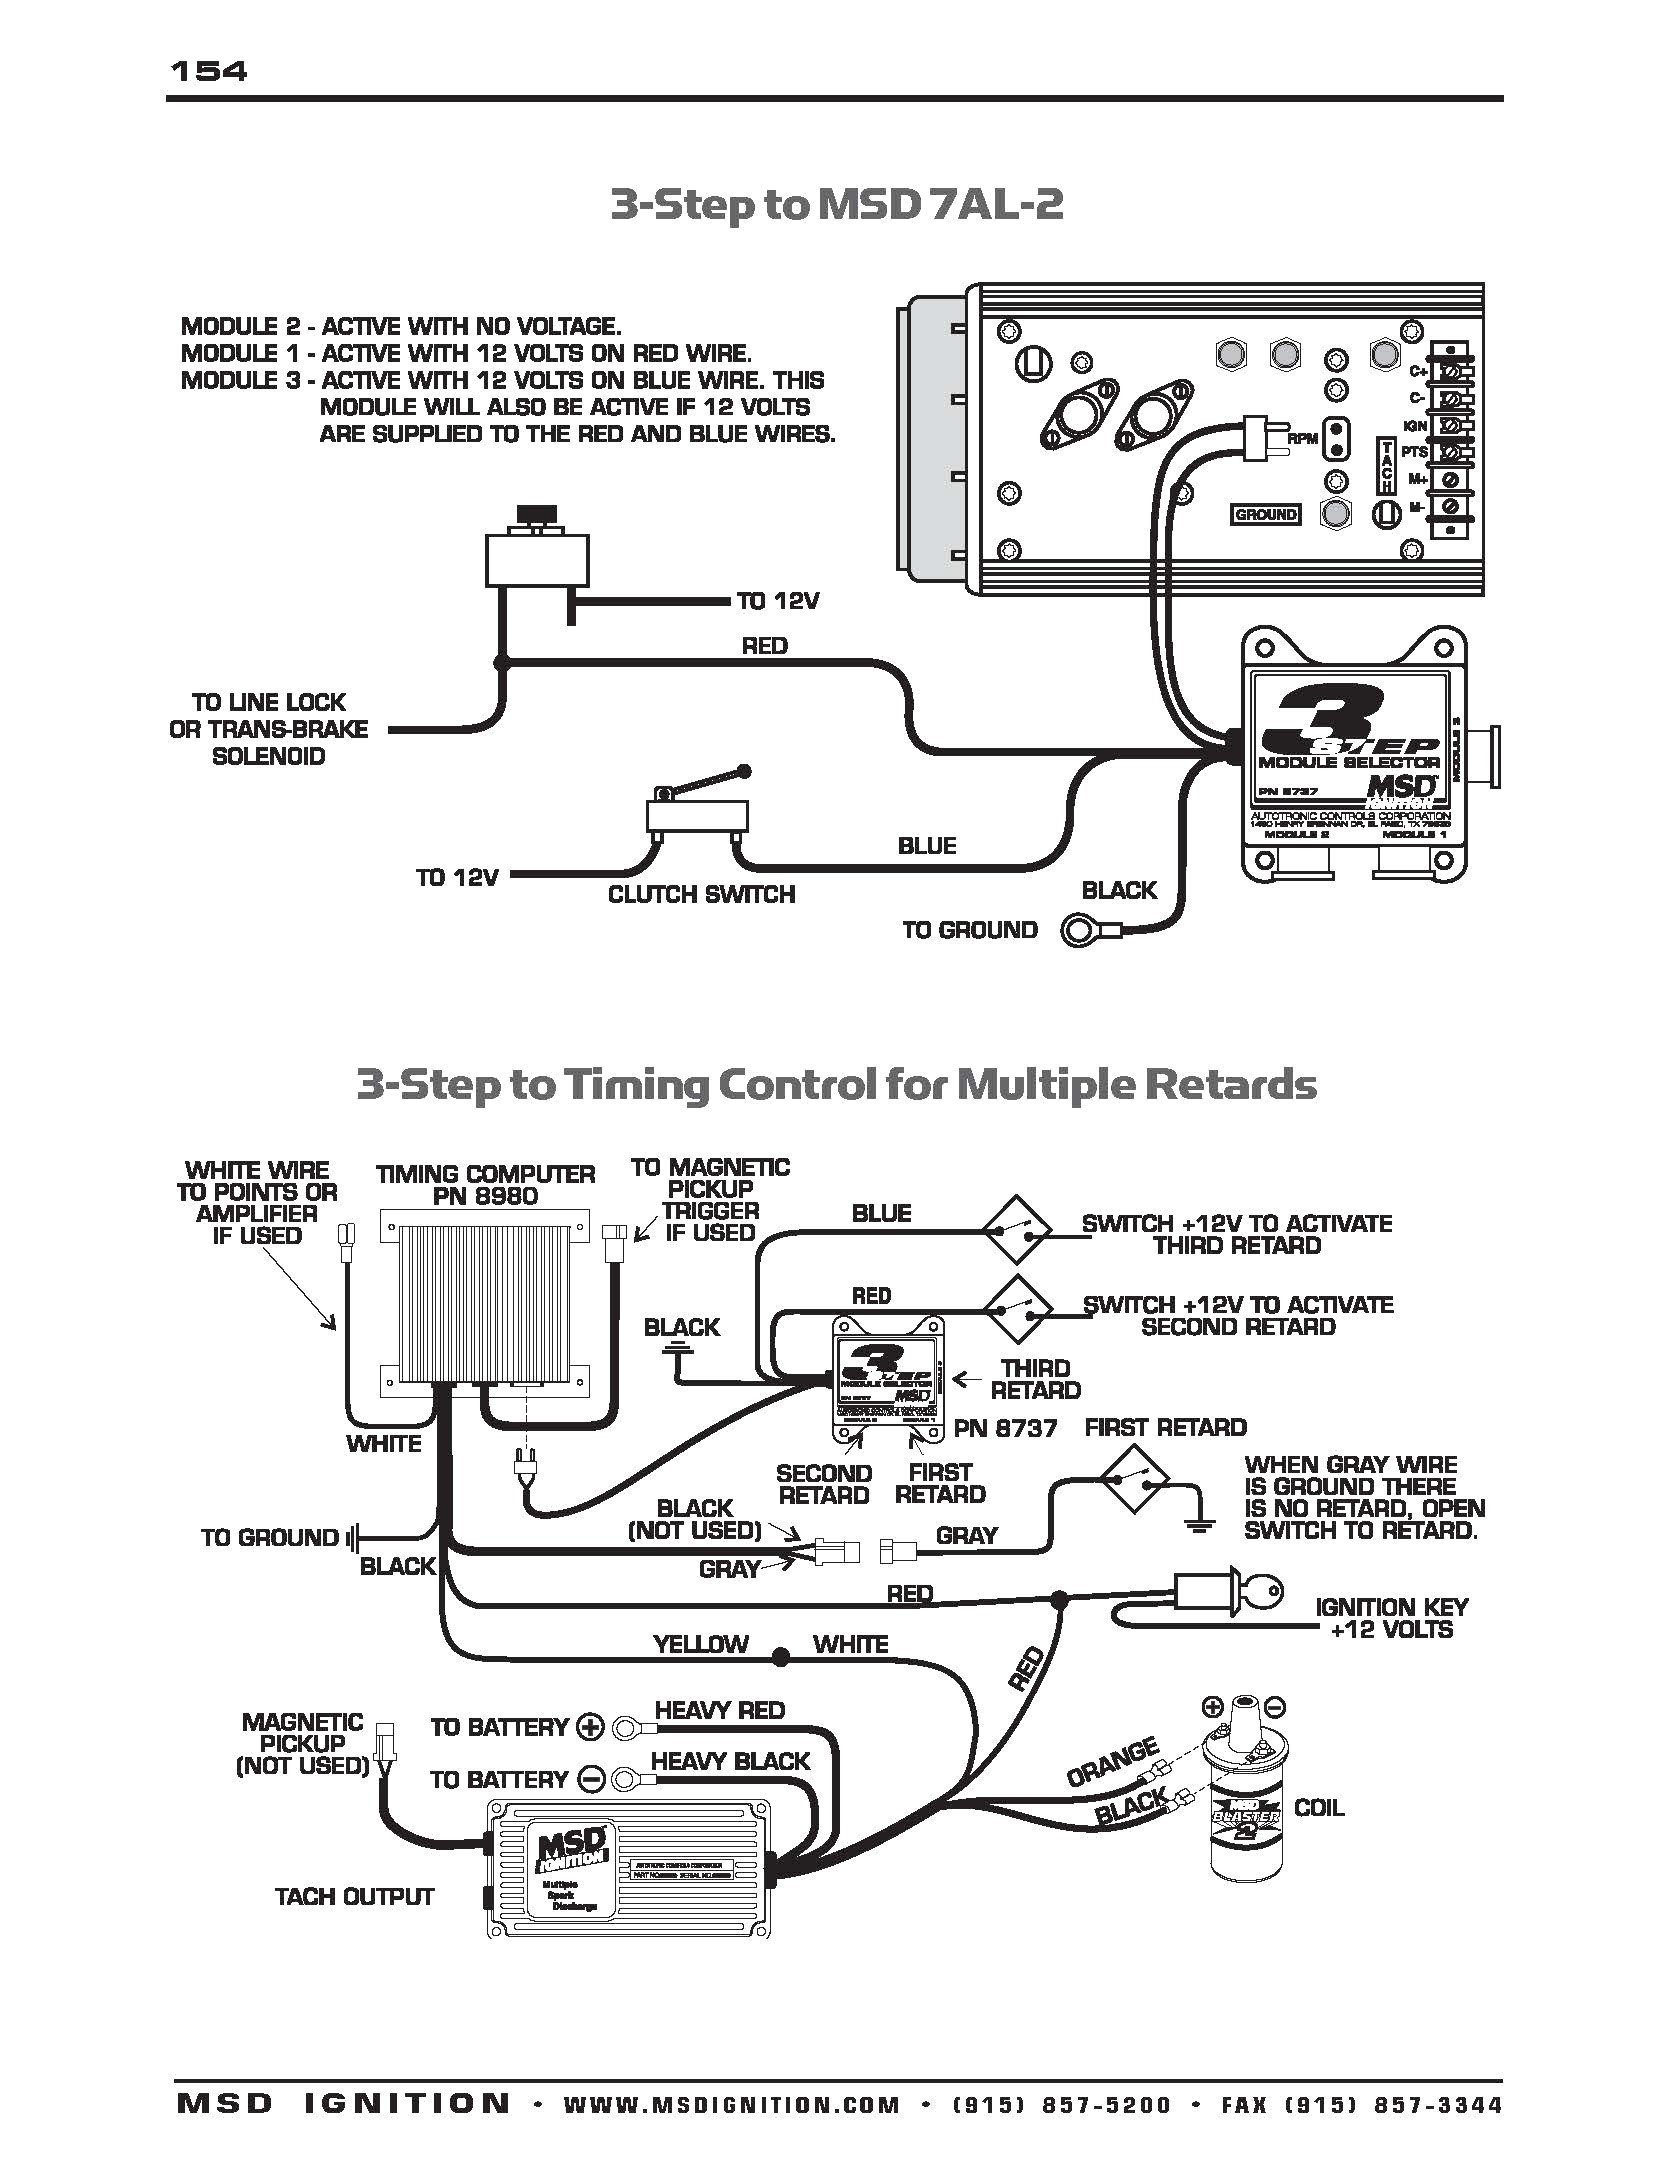 Msd Distributor Wiring Diagram 3 Wire Ignition Switch Wiring Diagram Reference Msd Grid Ignition